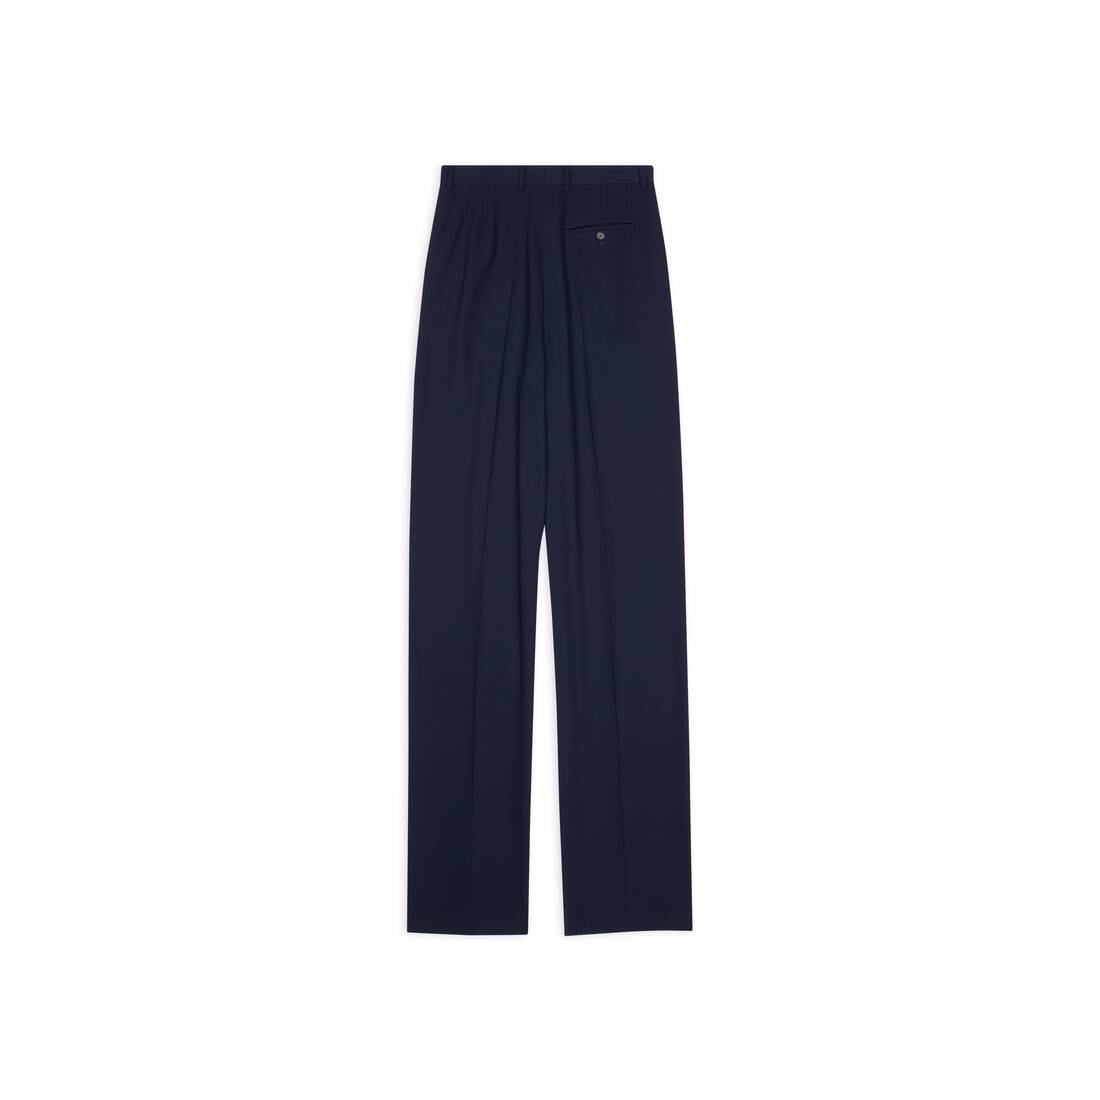 Men's Large Fit Tailored Pants in Navy Blue - 6